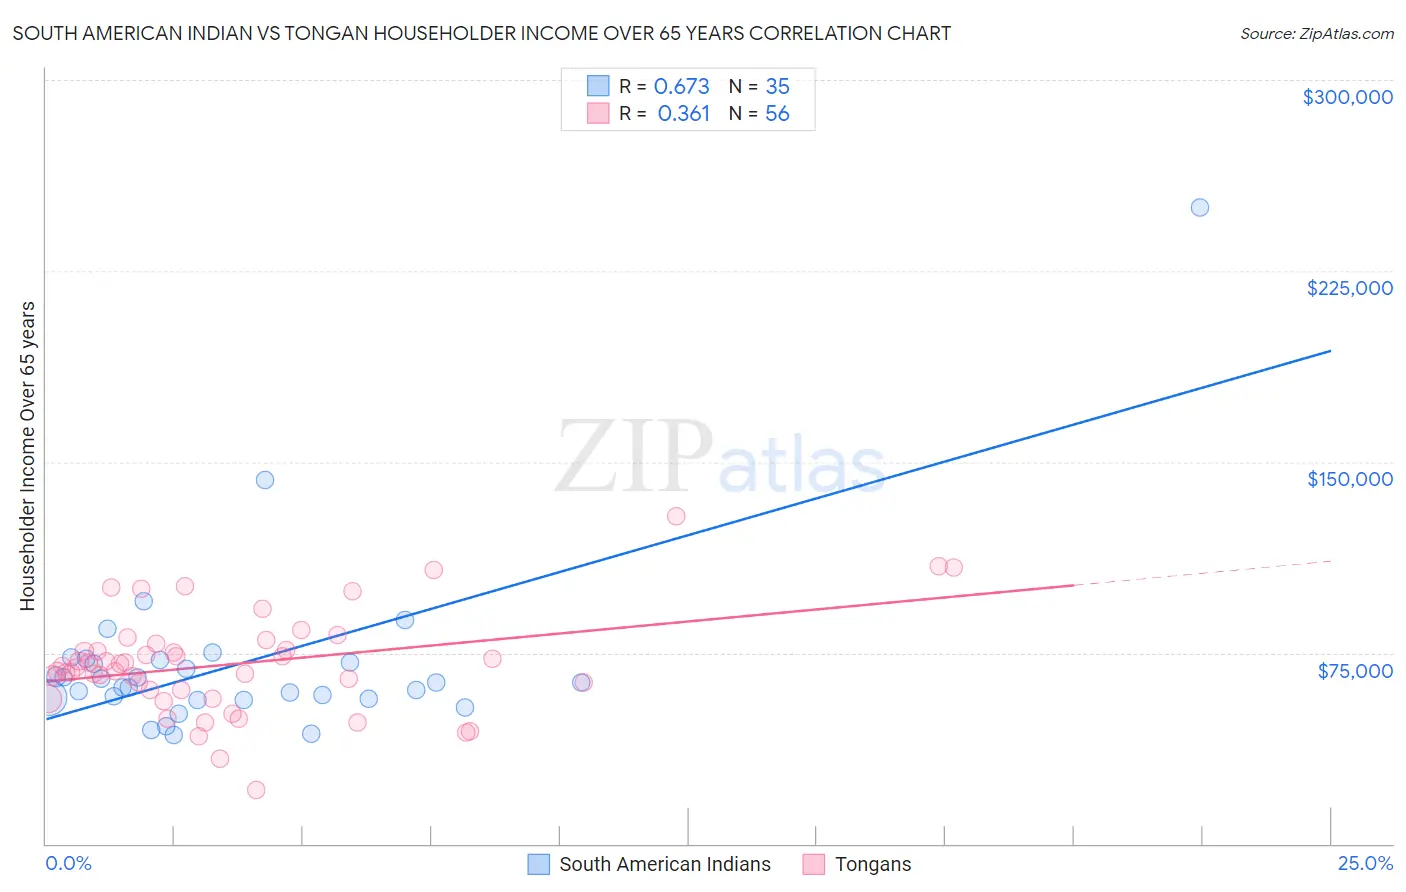 South American Indian vs Tongan Householder Income Over 65 years